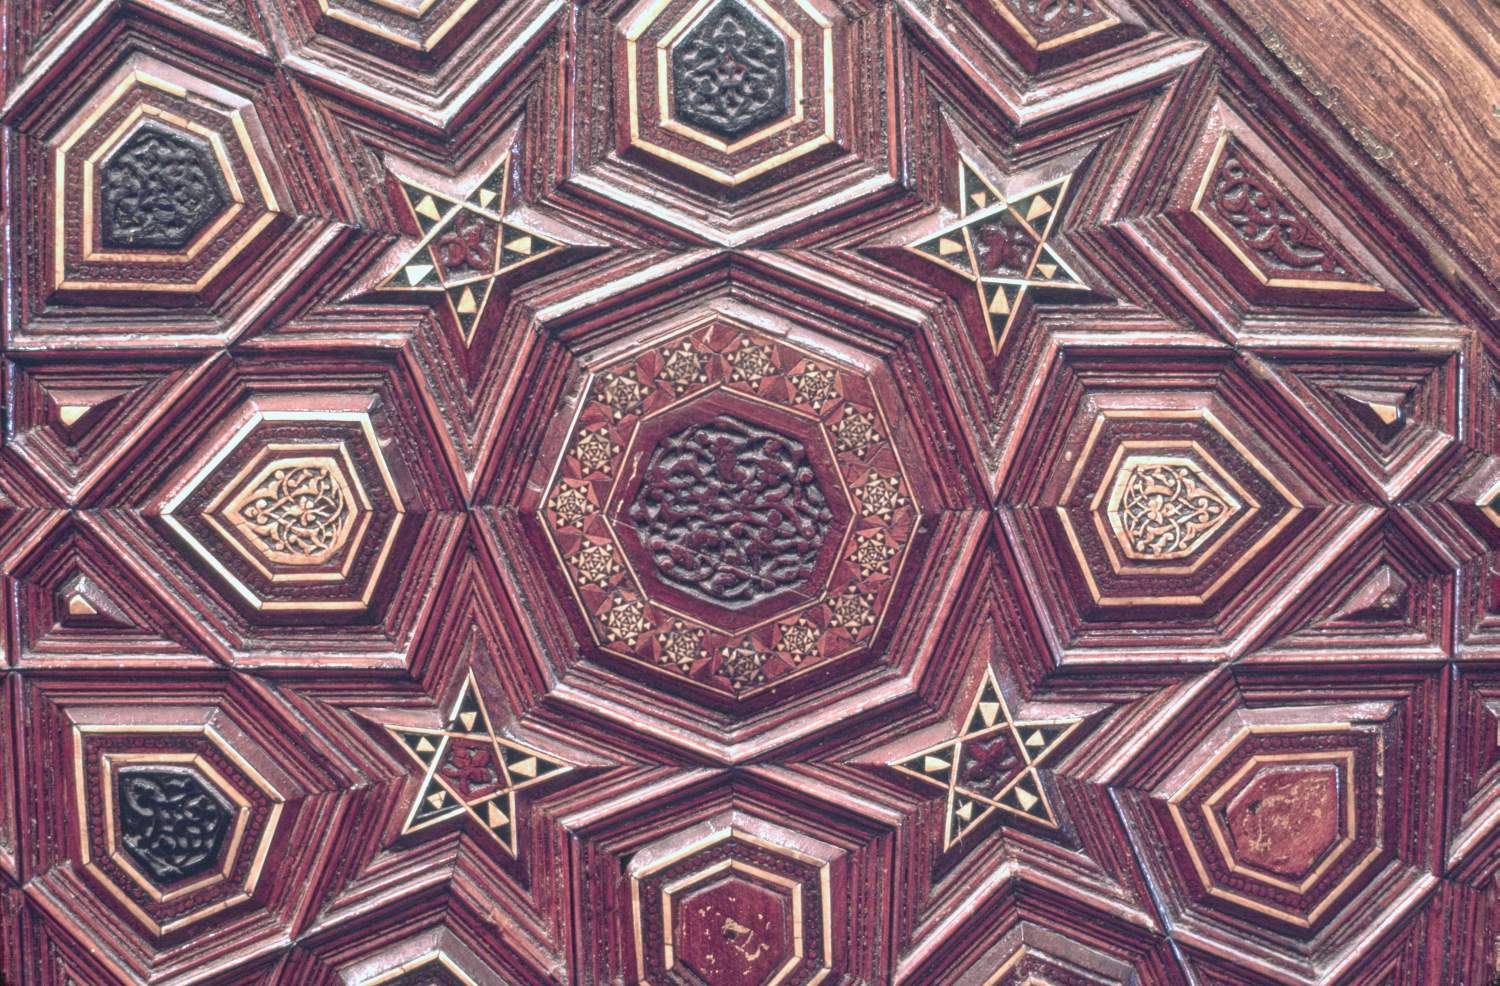 Minbar, detail of inlaid wooden panel on side.